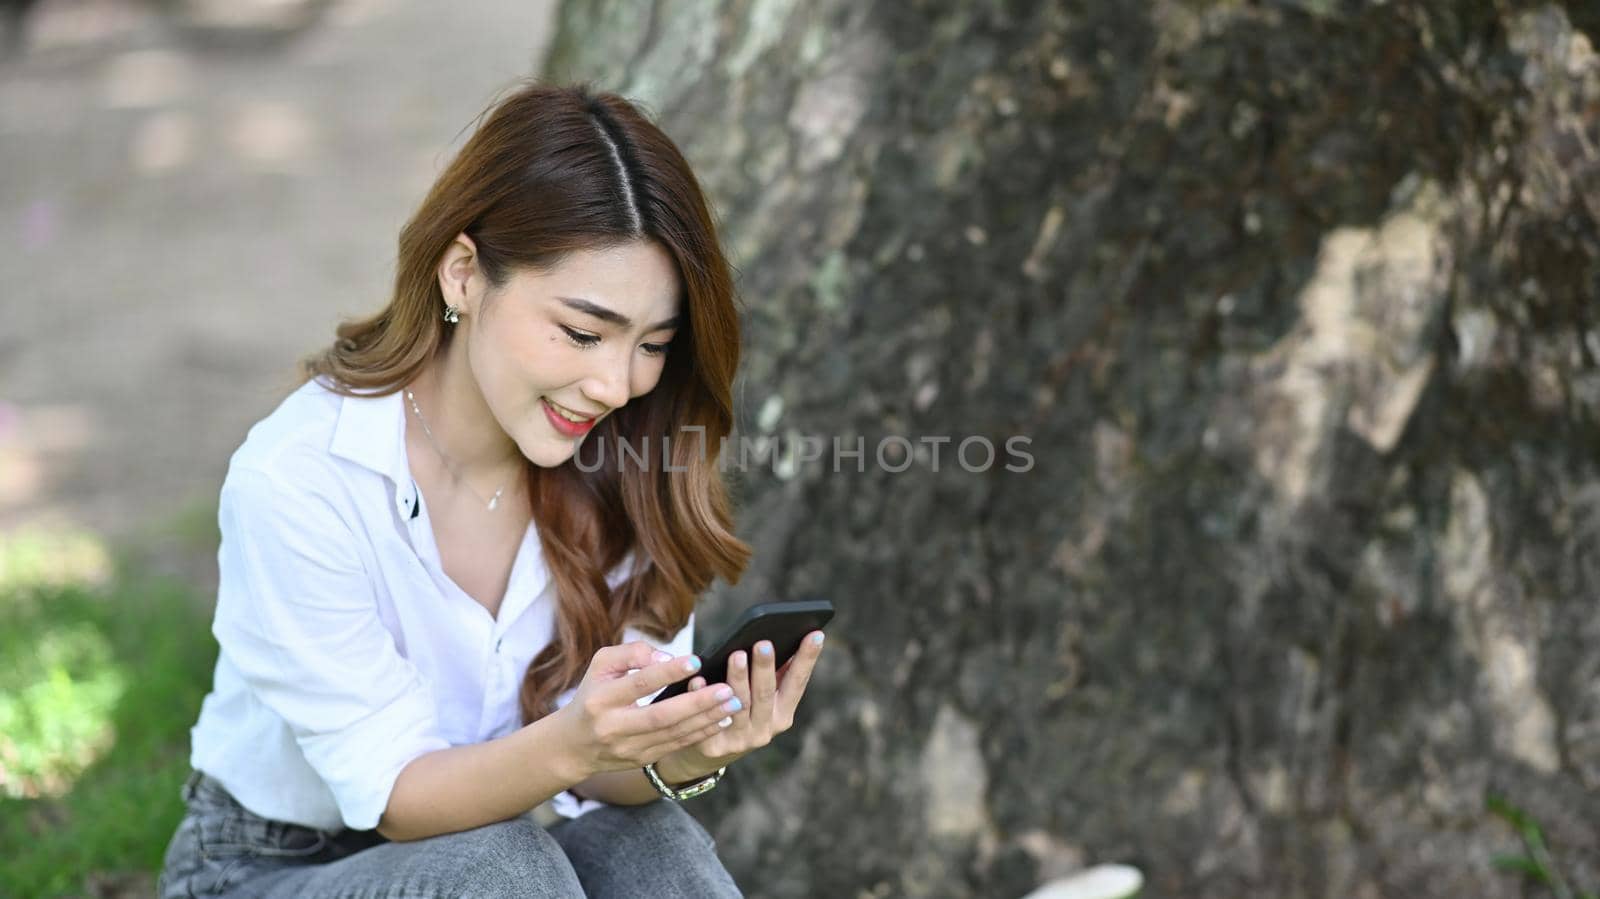 Beautiful young woman sitting under tree in the park and using smart phone. by prathanchorruangsak